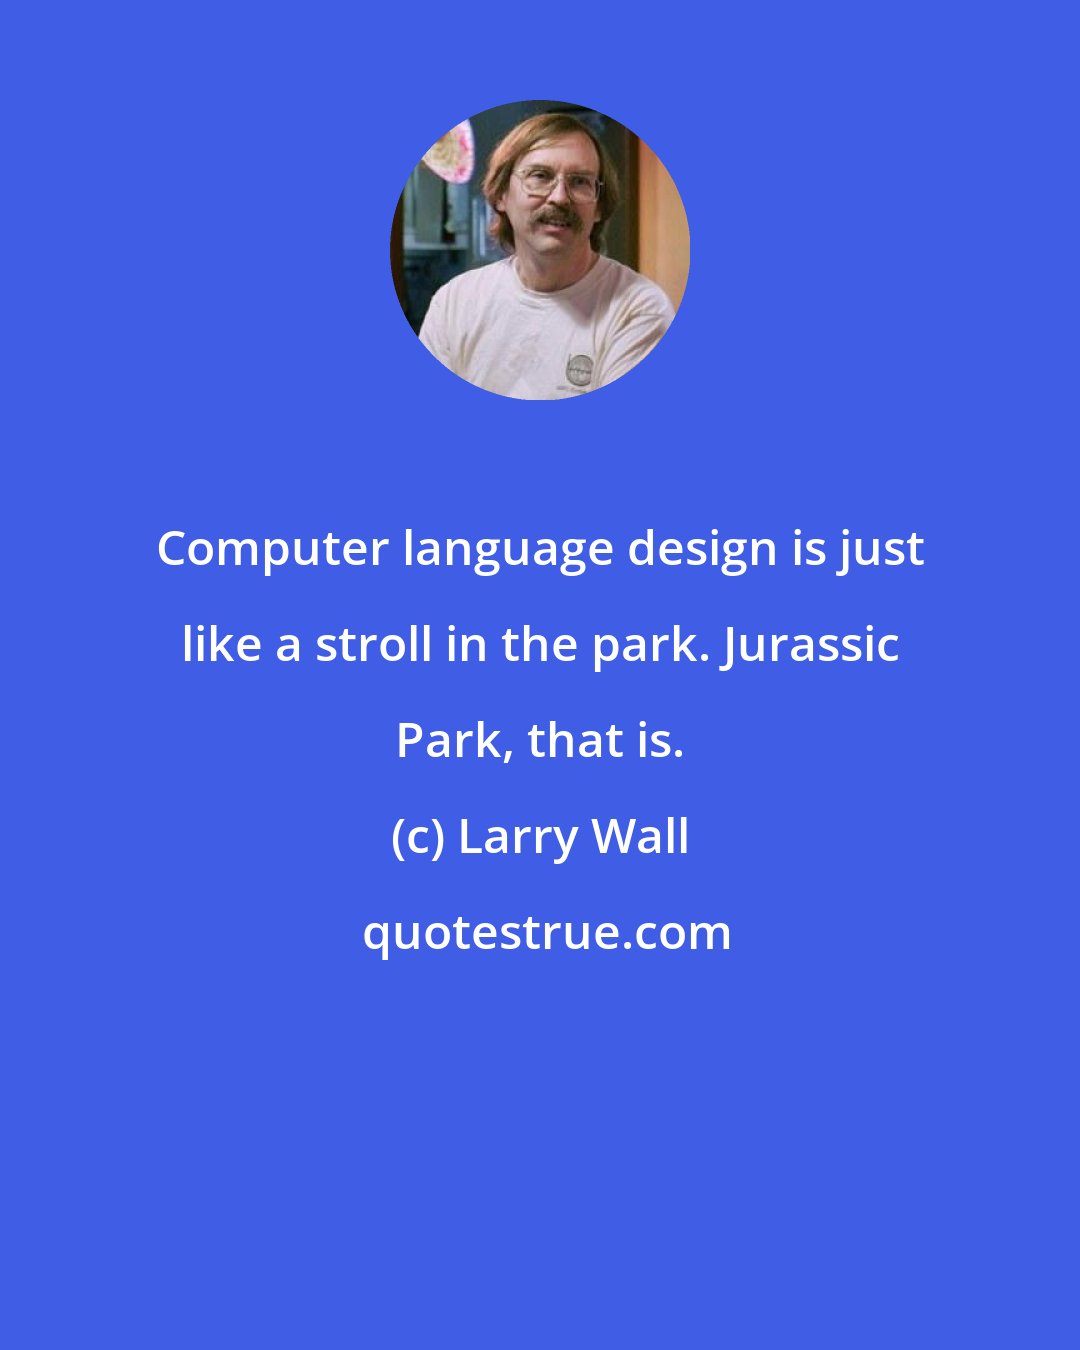 Larry Wall: Computer language design is just like a stroll in the park. Jurassic Park, that is.